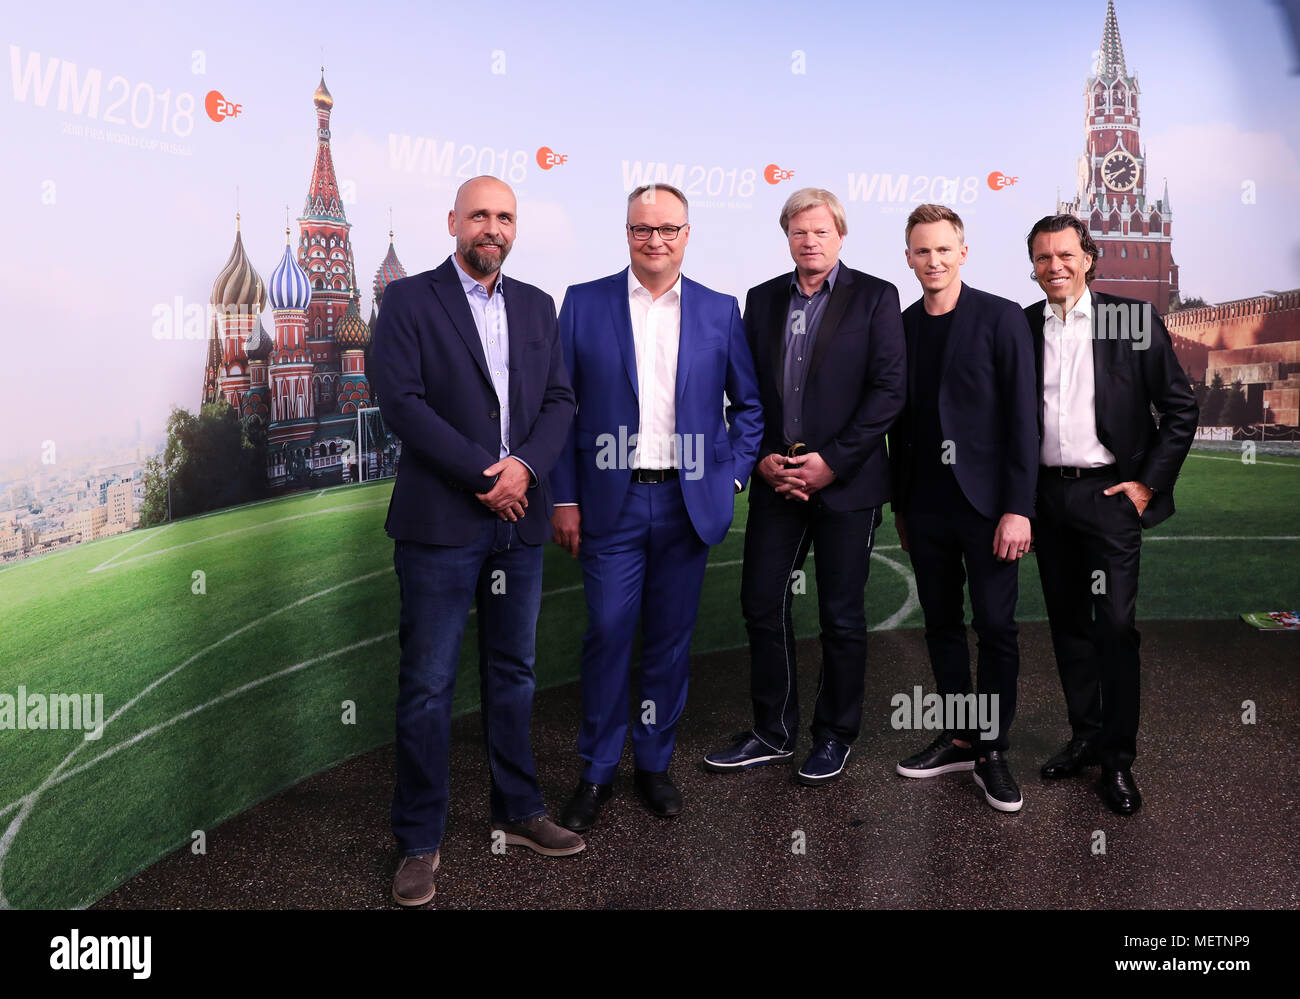 23 April 2018, Germany, Hamburg: Holger Stanislawski (L-R), Oliver Welke, Oliver Kahn, Jochen Breyer and Urs Meier, ZDF presenters for the soccer World Cup 2018 in Russia, during a photocall prior to a press conference of the German TV channels ARD and ZDF on the World Cup in Russia. Photo: Christian Charisius/dpa Stock Photo